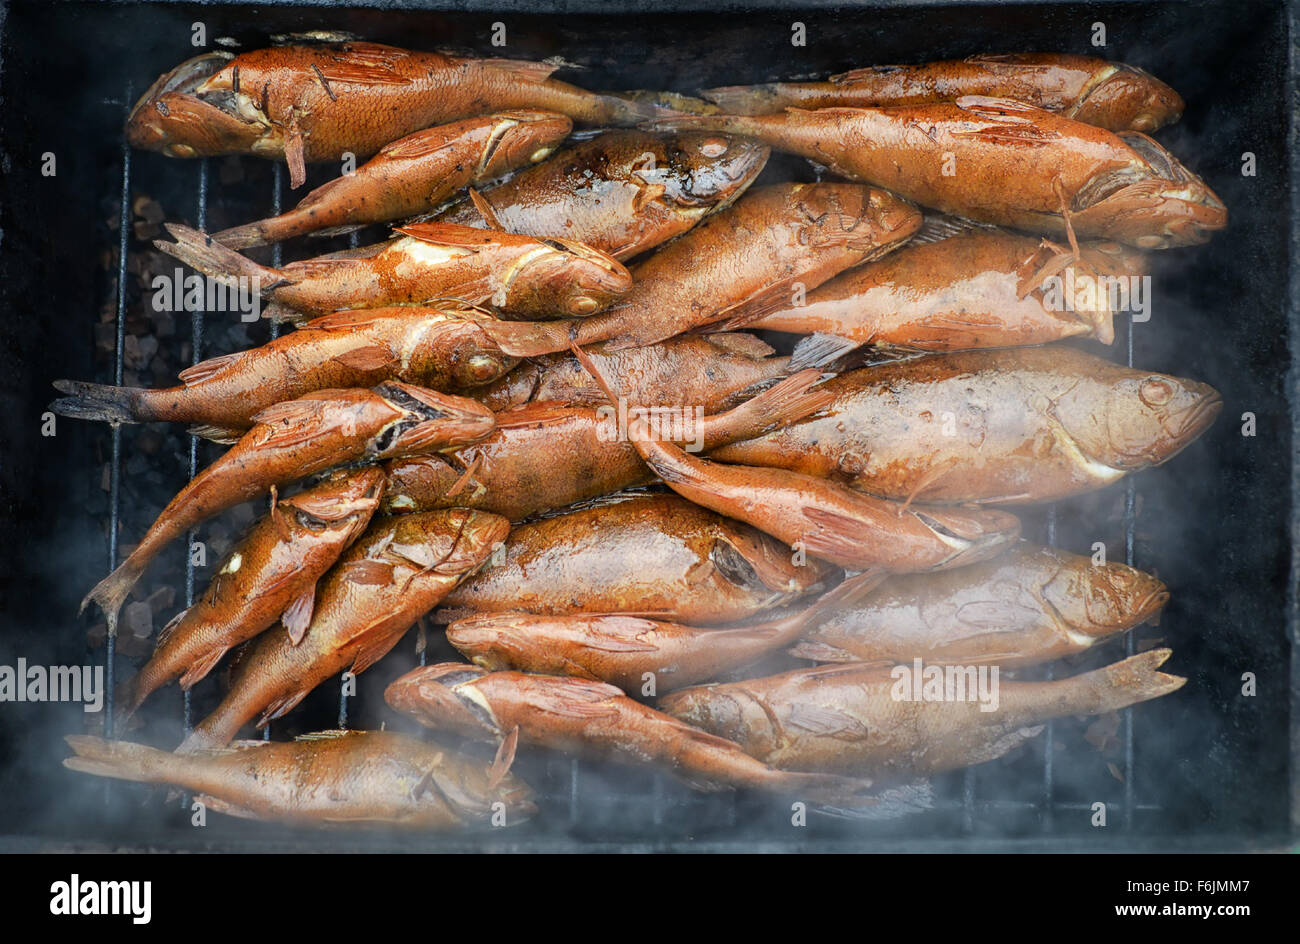 Fresh hot smoked fish on the grill Stock Photo